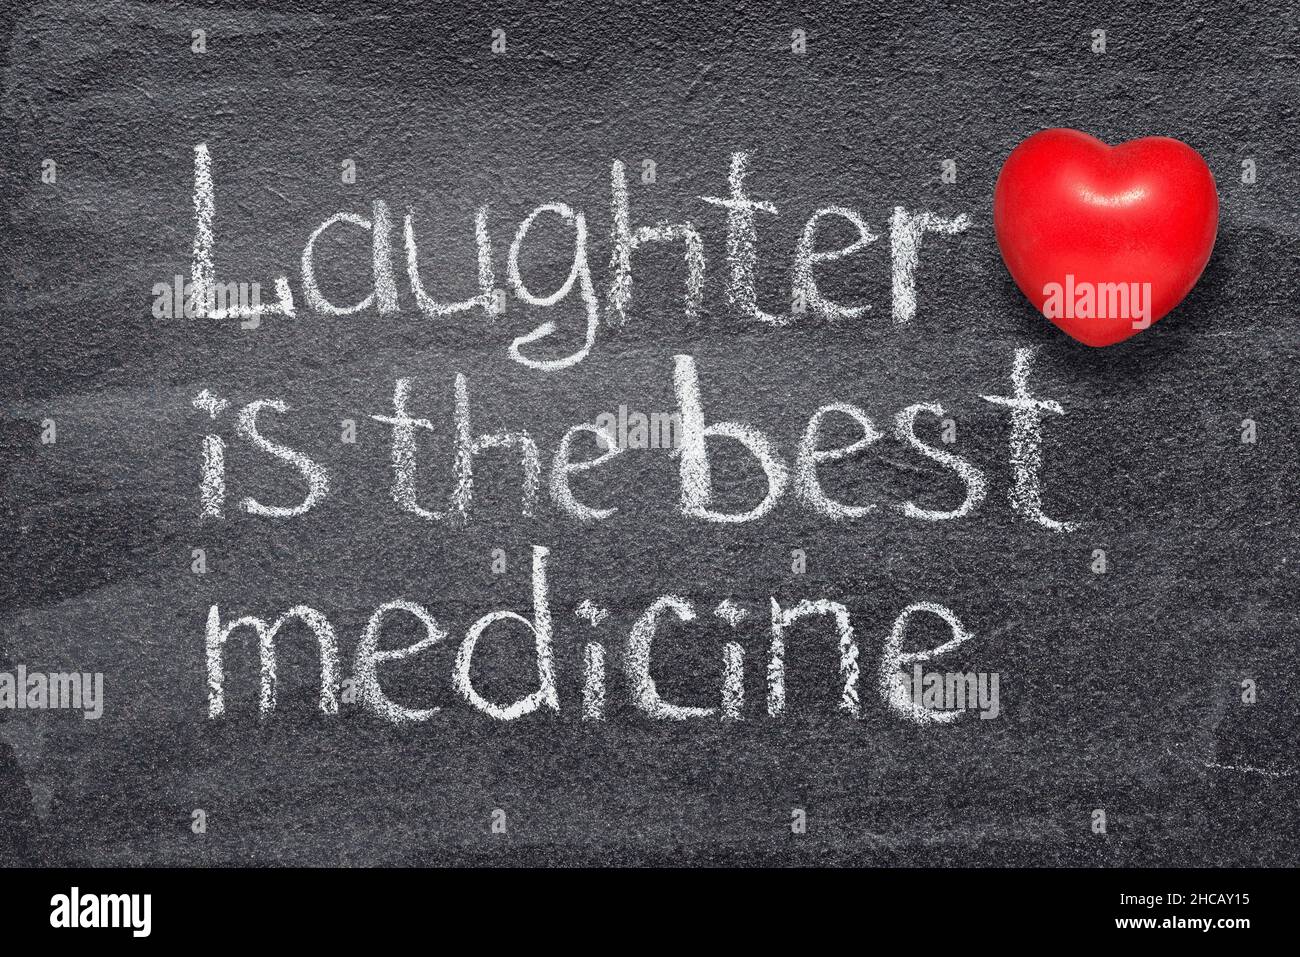 Laughter is the best medicine proverb written on chalkboard with red heart symbol Stock Photo